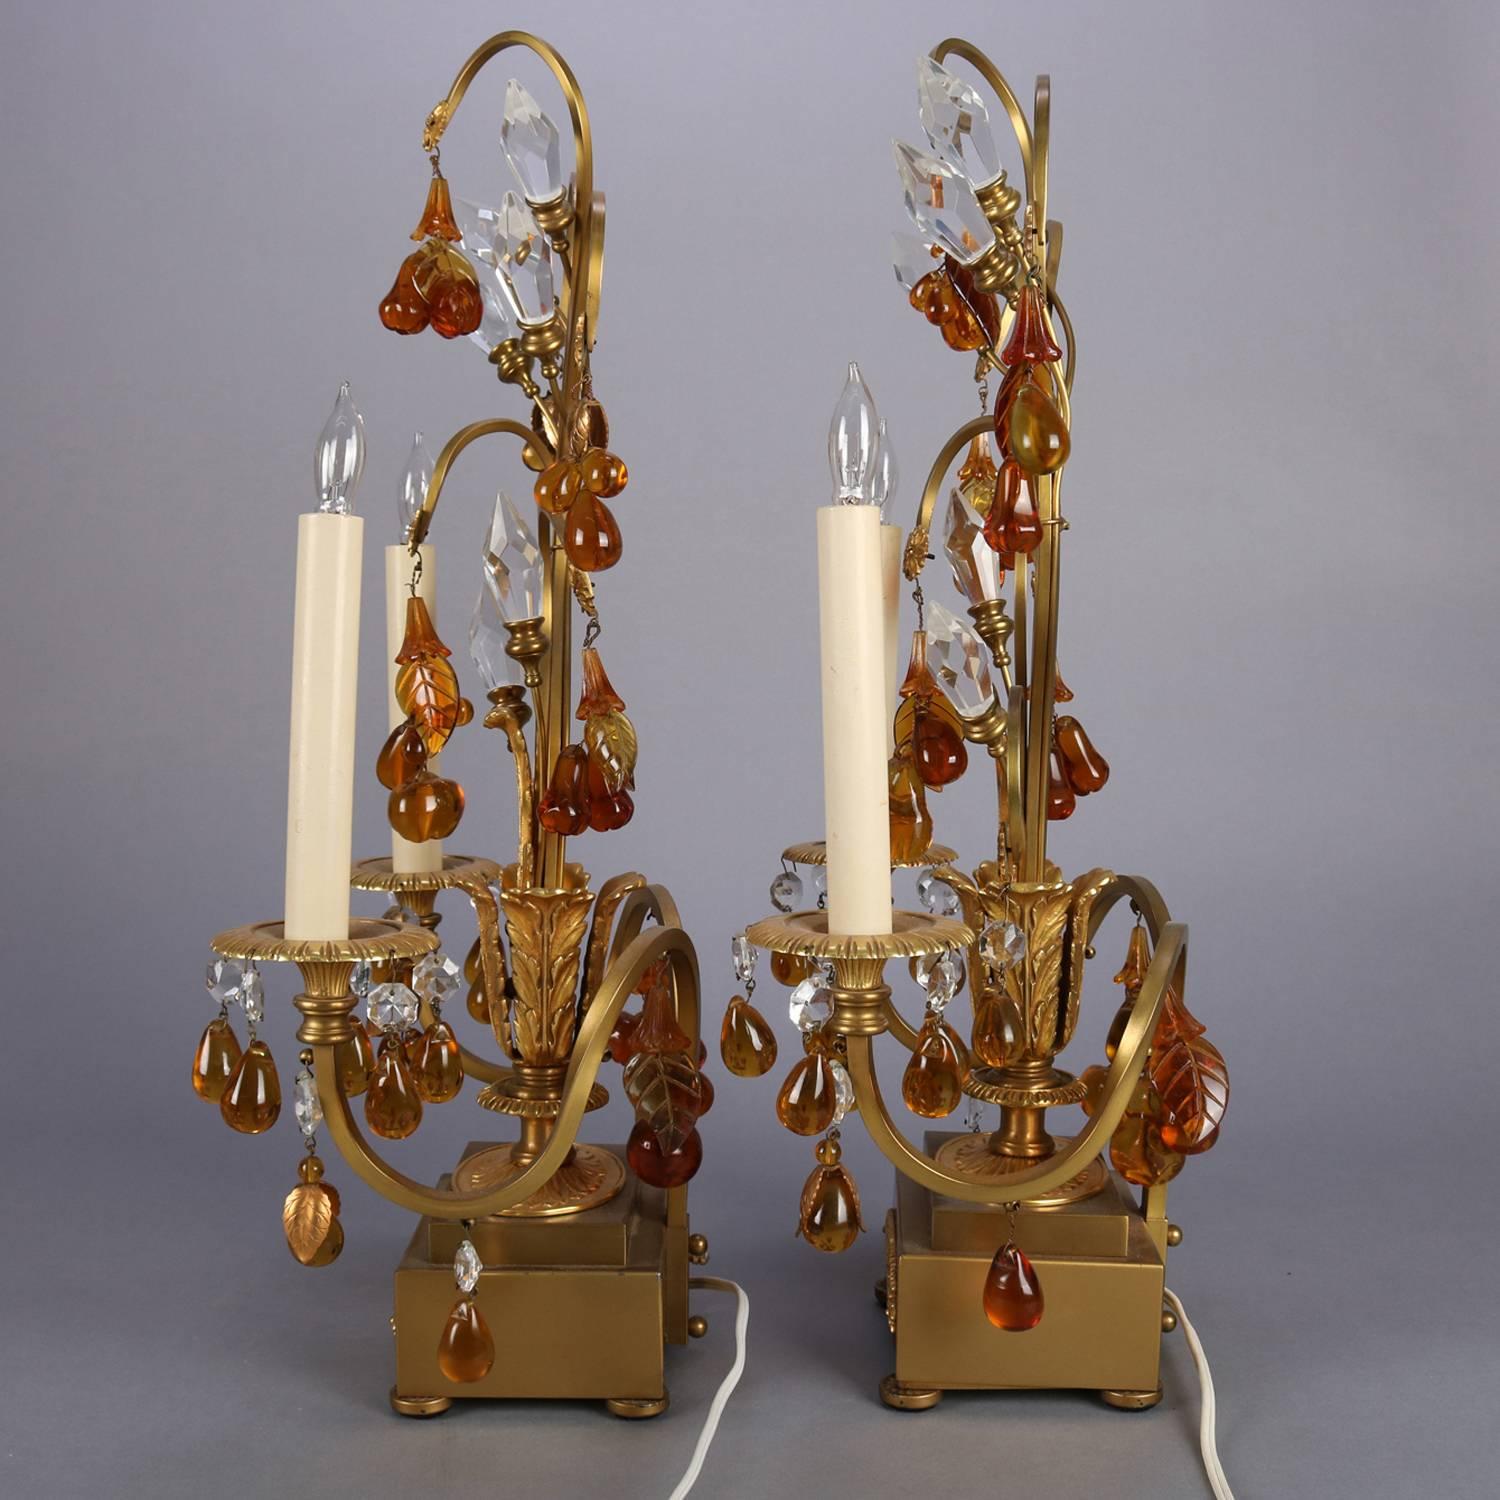 Pair of French two-light candelabra lamps feature gilt bronze foliate branch and leaf form gilt frame with amber glass and cut crystal prisms, each lamp with two candle lights, professionally rewired, circa 1930

Measure - 22